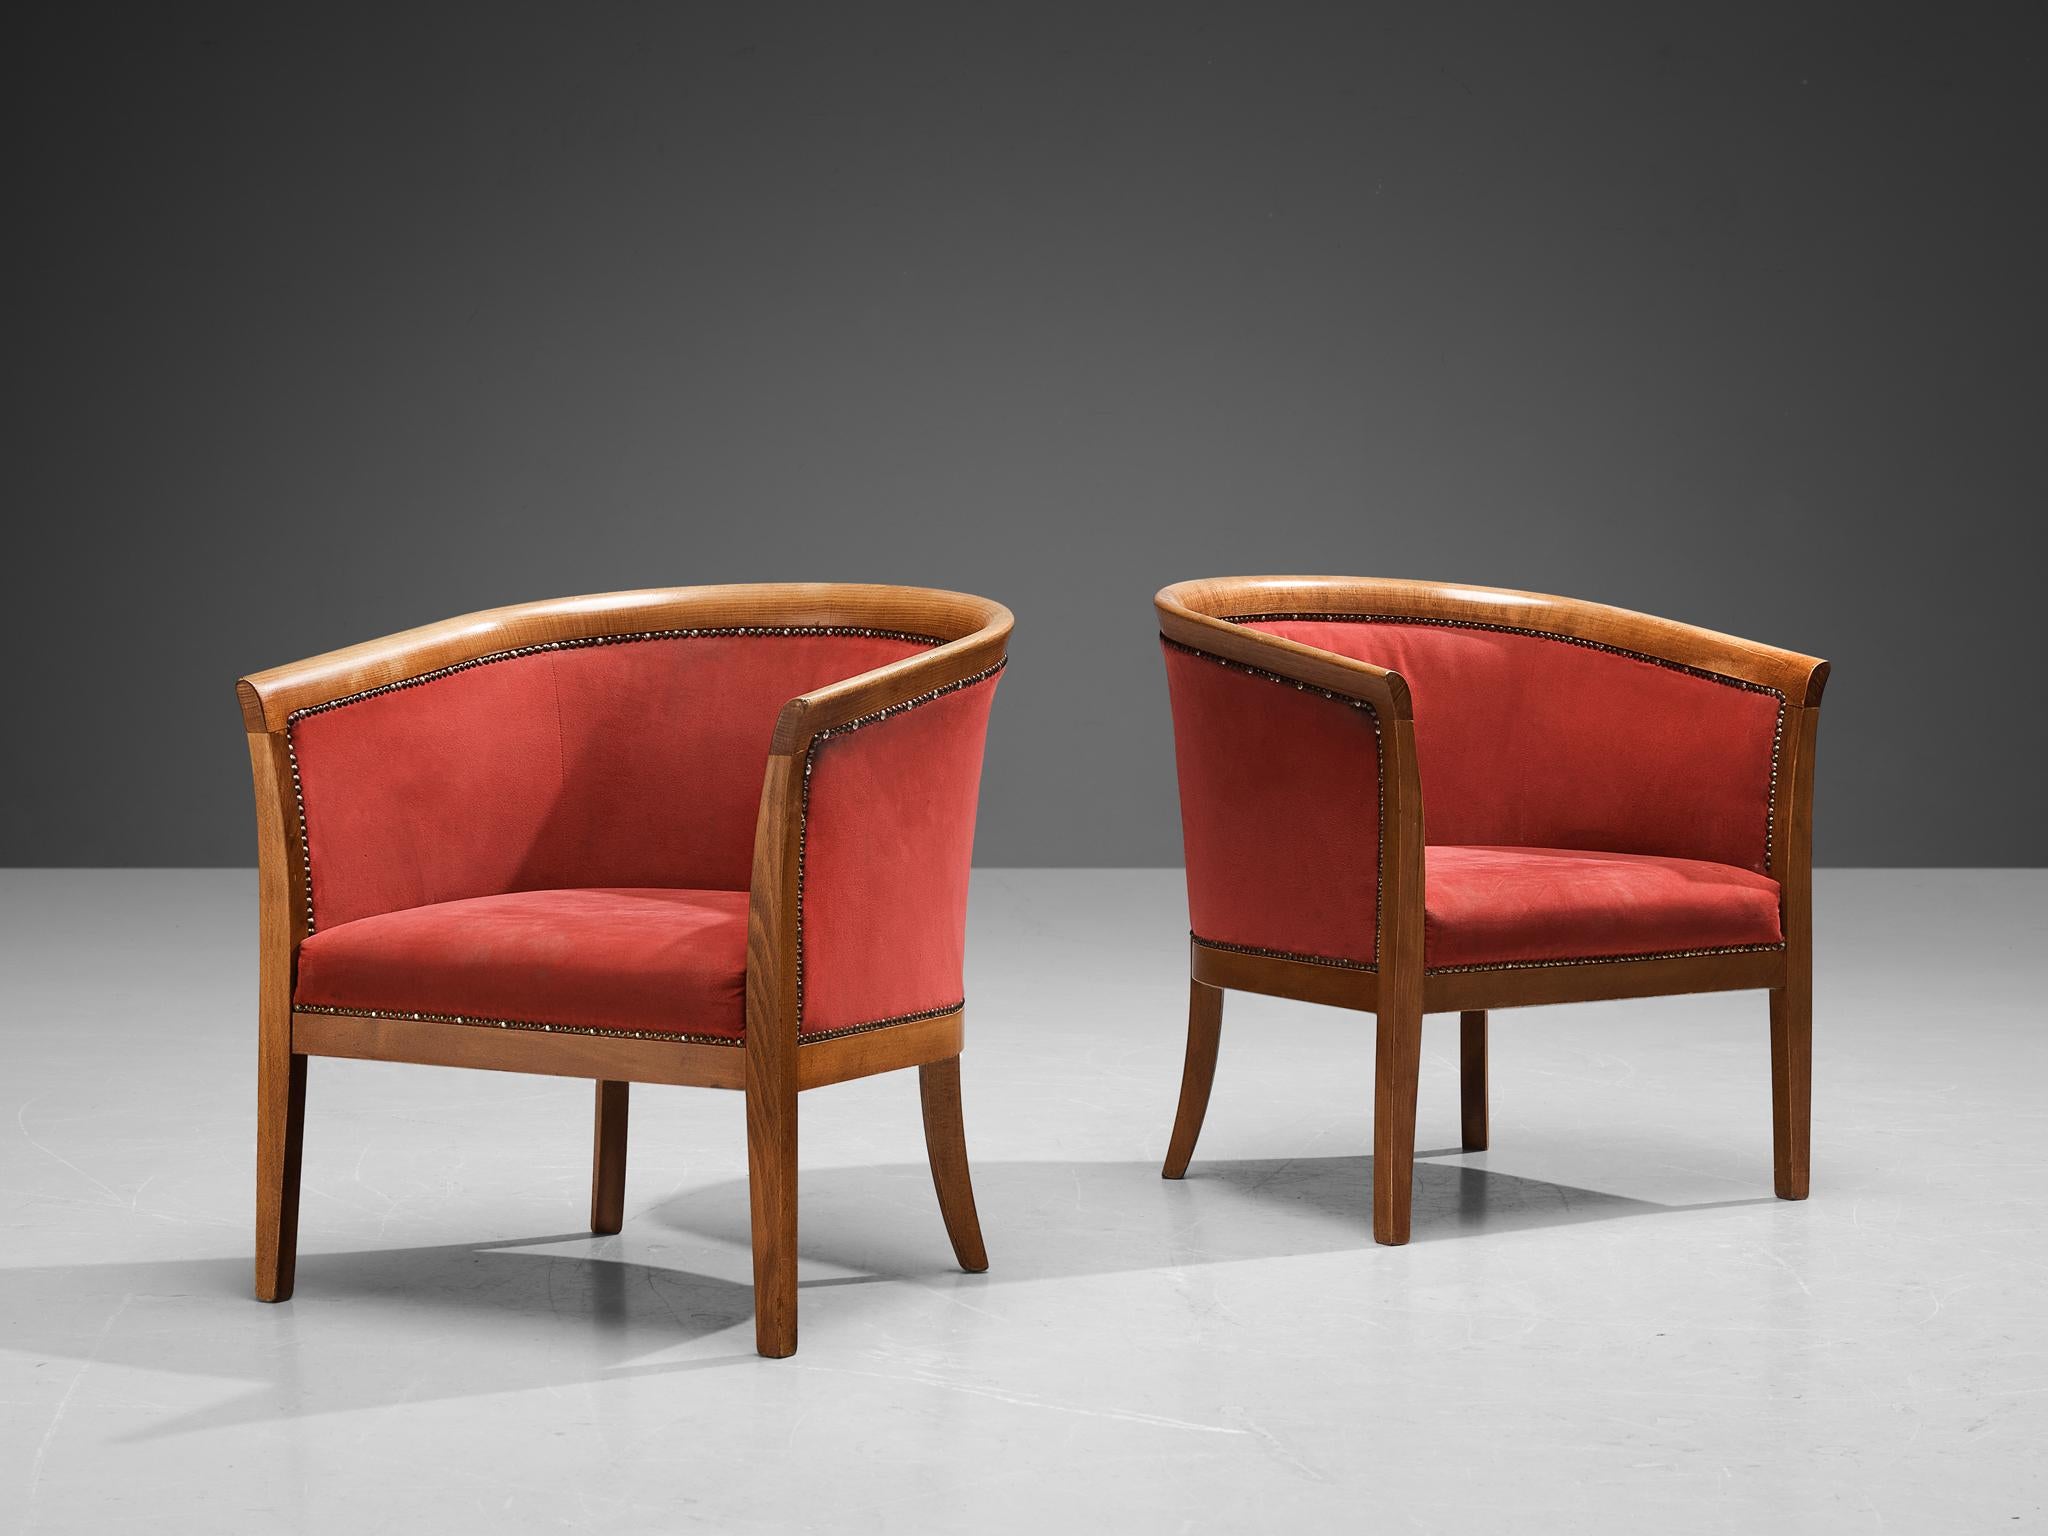 Club chairs, red fabric, beech, brass, France, 1940s.

These classically sculpted armchairs feature seatings that are designed as a shell, which embraces the sitter wonderfully. The curvaceous lines of the frame are further emphasized by the brass